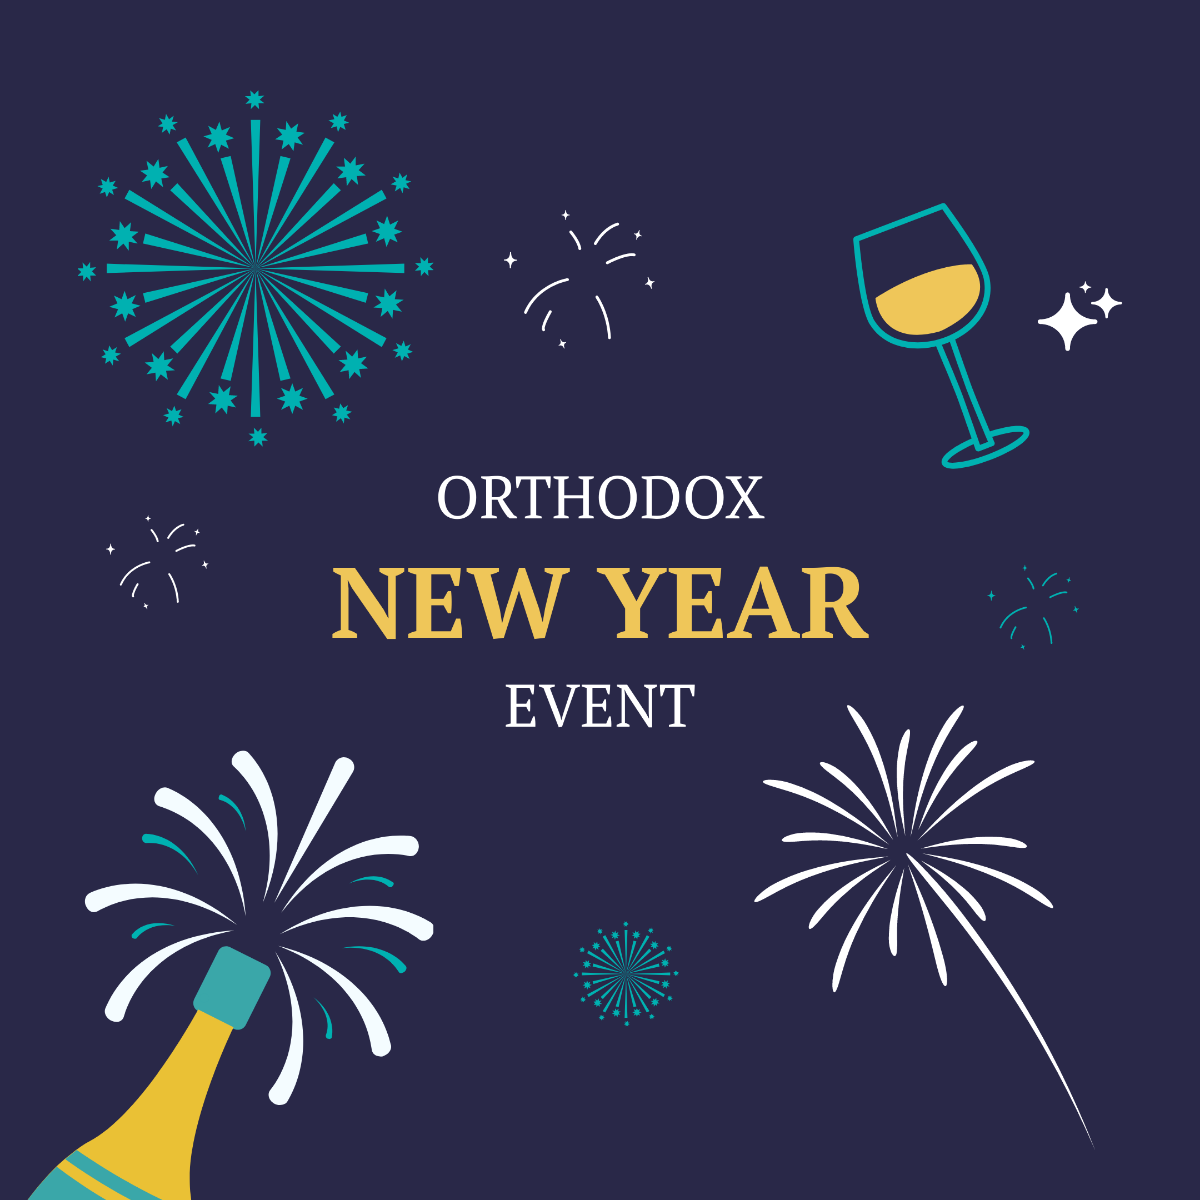 Orthodox New Year Event Instagram Post Template